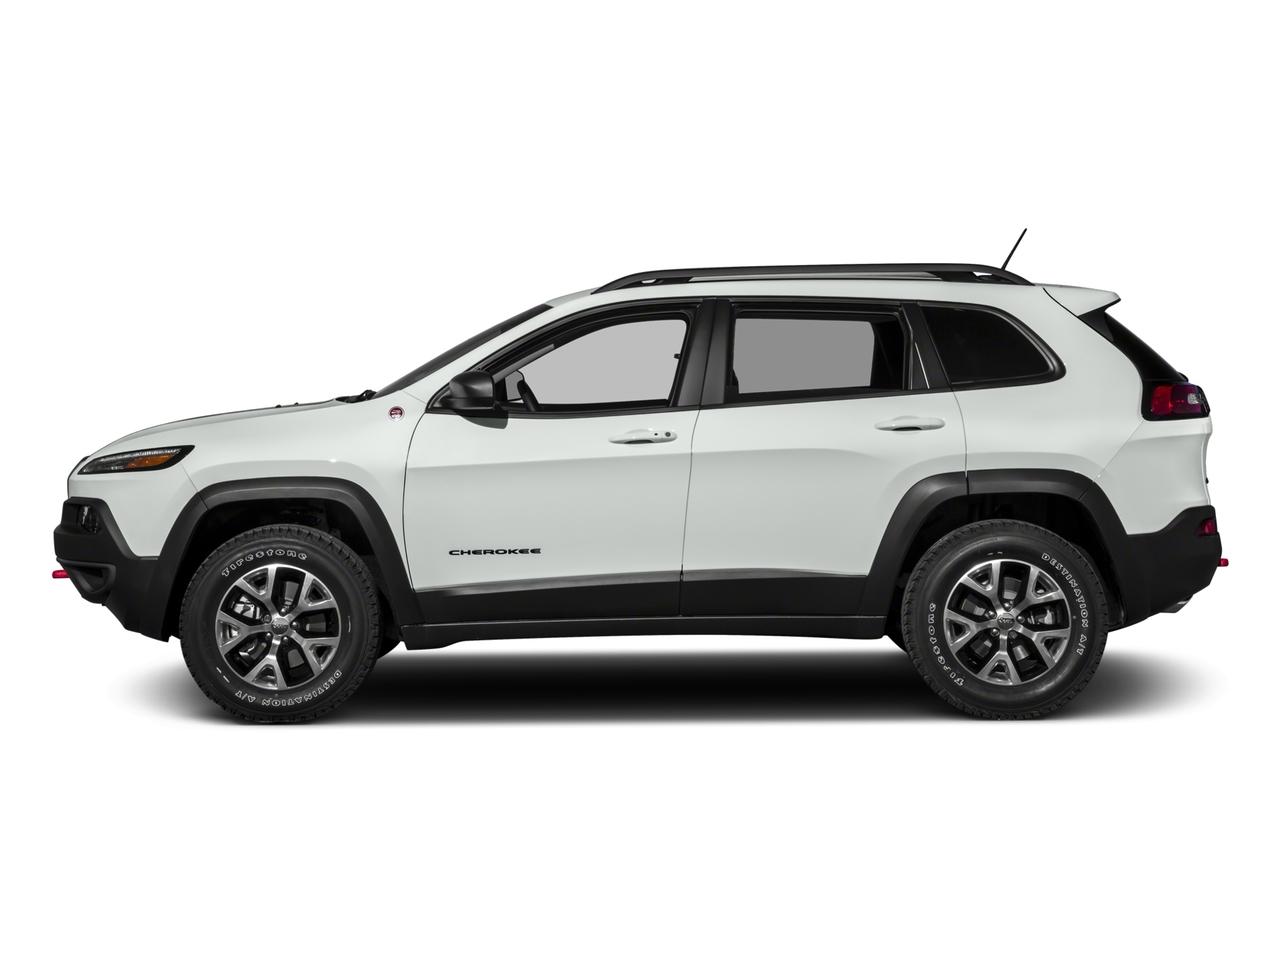 Used 2017 Jeep Cherokee Trailhawk with VIN 1C4PJMBS3HW622764 for sale in Farmington, NM